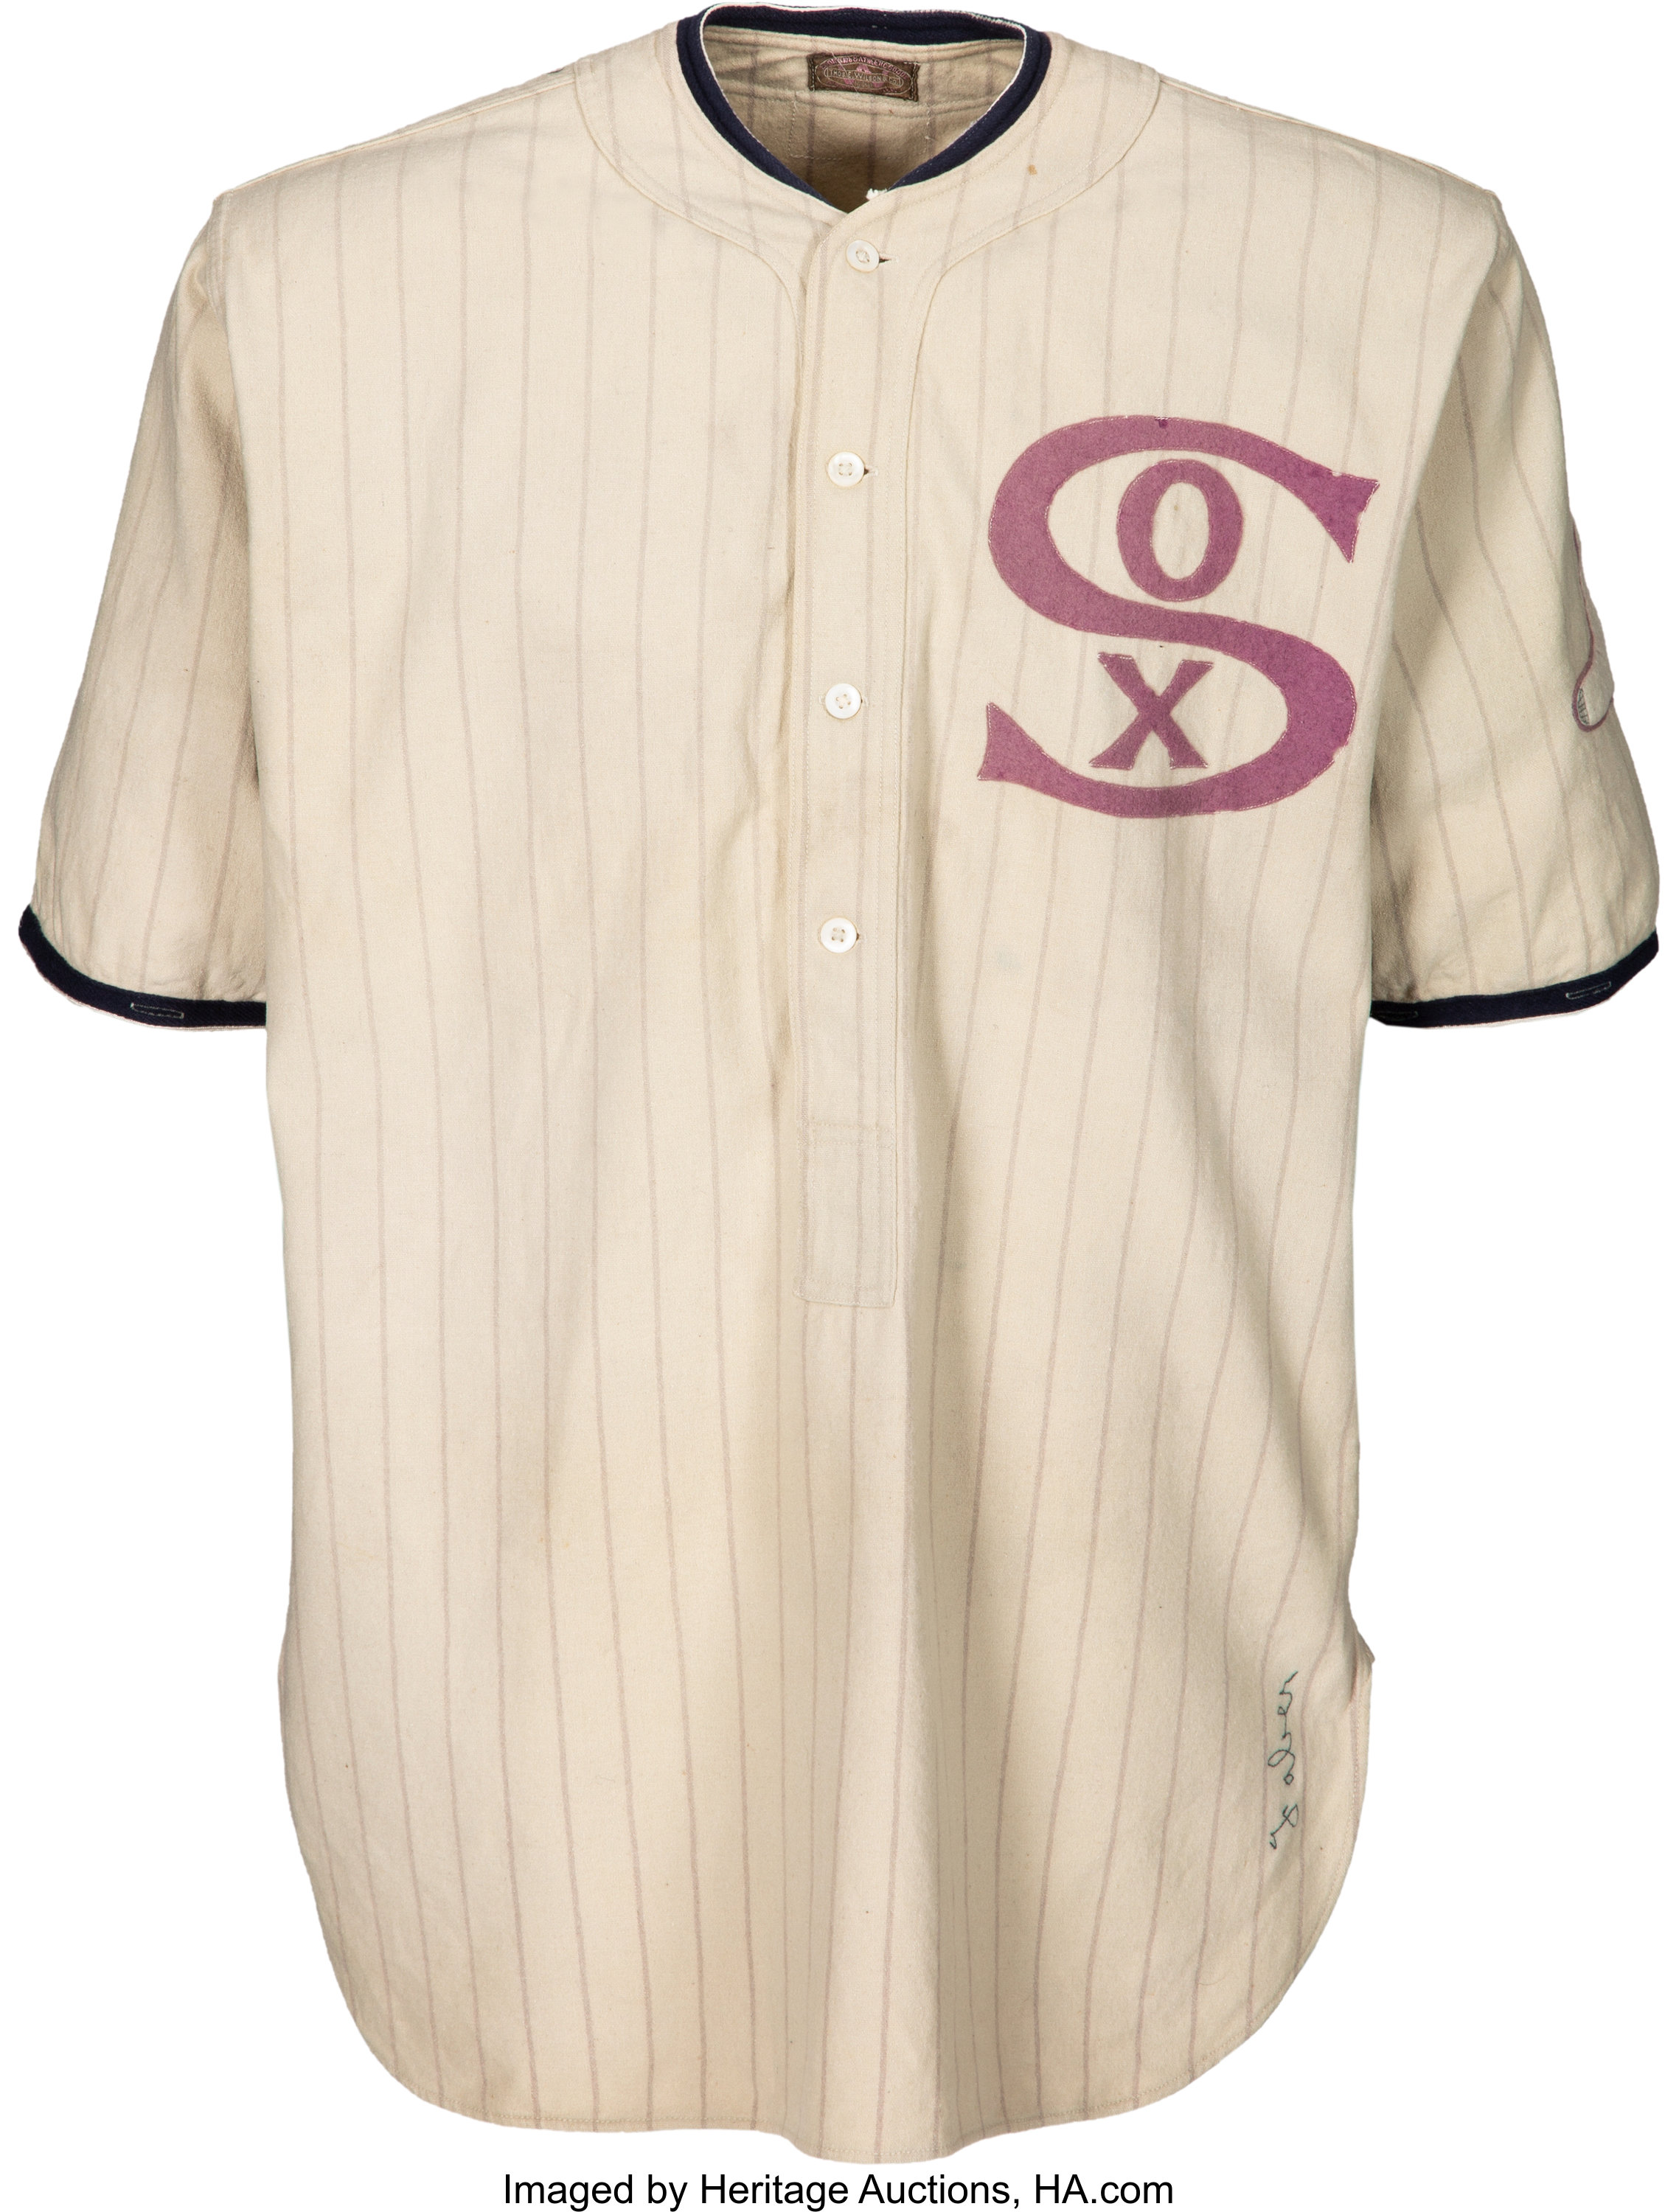 Grey Flannel Auctions - 1917 Eddie Cicotte Chicago White Sox World Series  Game-Used Flannel Jersey (Photo-Matched To Multiple Images • Only One  Known) 🤯 #JustConsigned #AuctionPreview #TheHobby #ComingSoon  #FlannelFriday